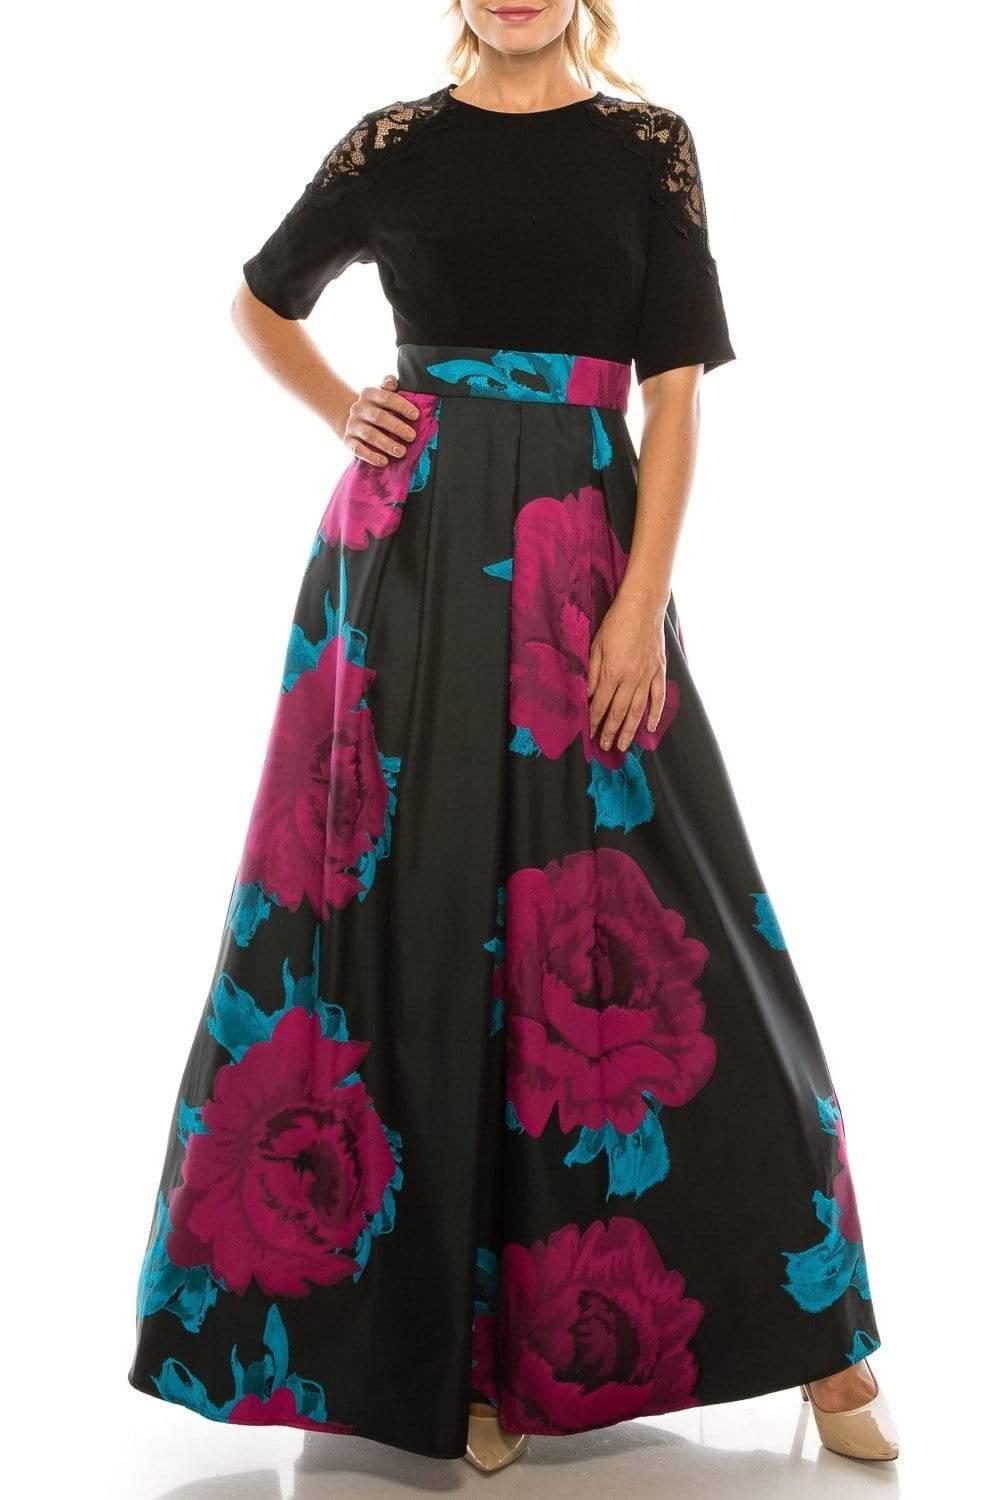 Ignite Evenings - IG3874 Lace Jewel Neck Floral Print A-line Gown